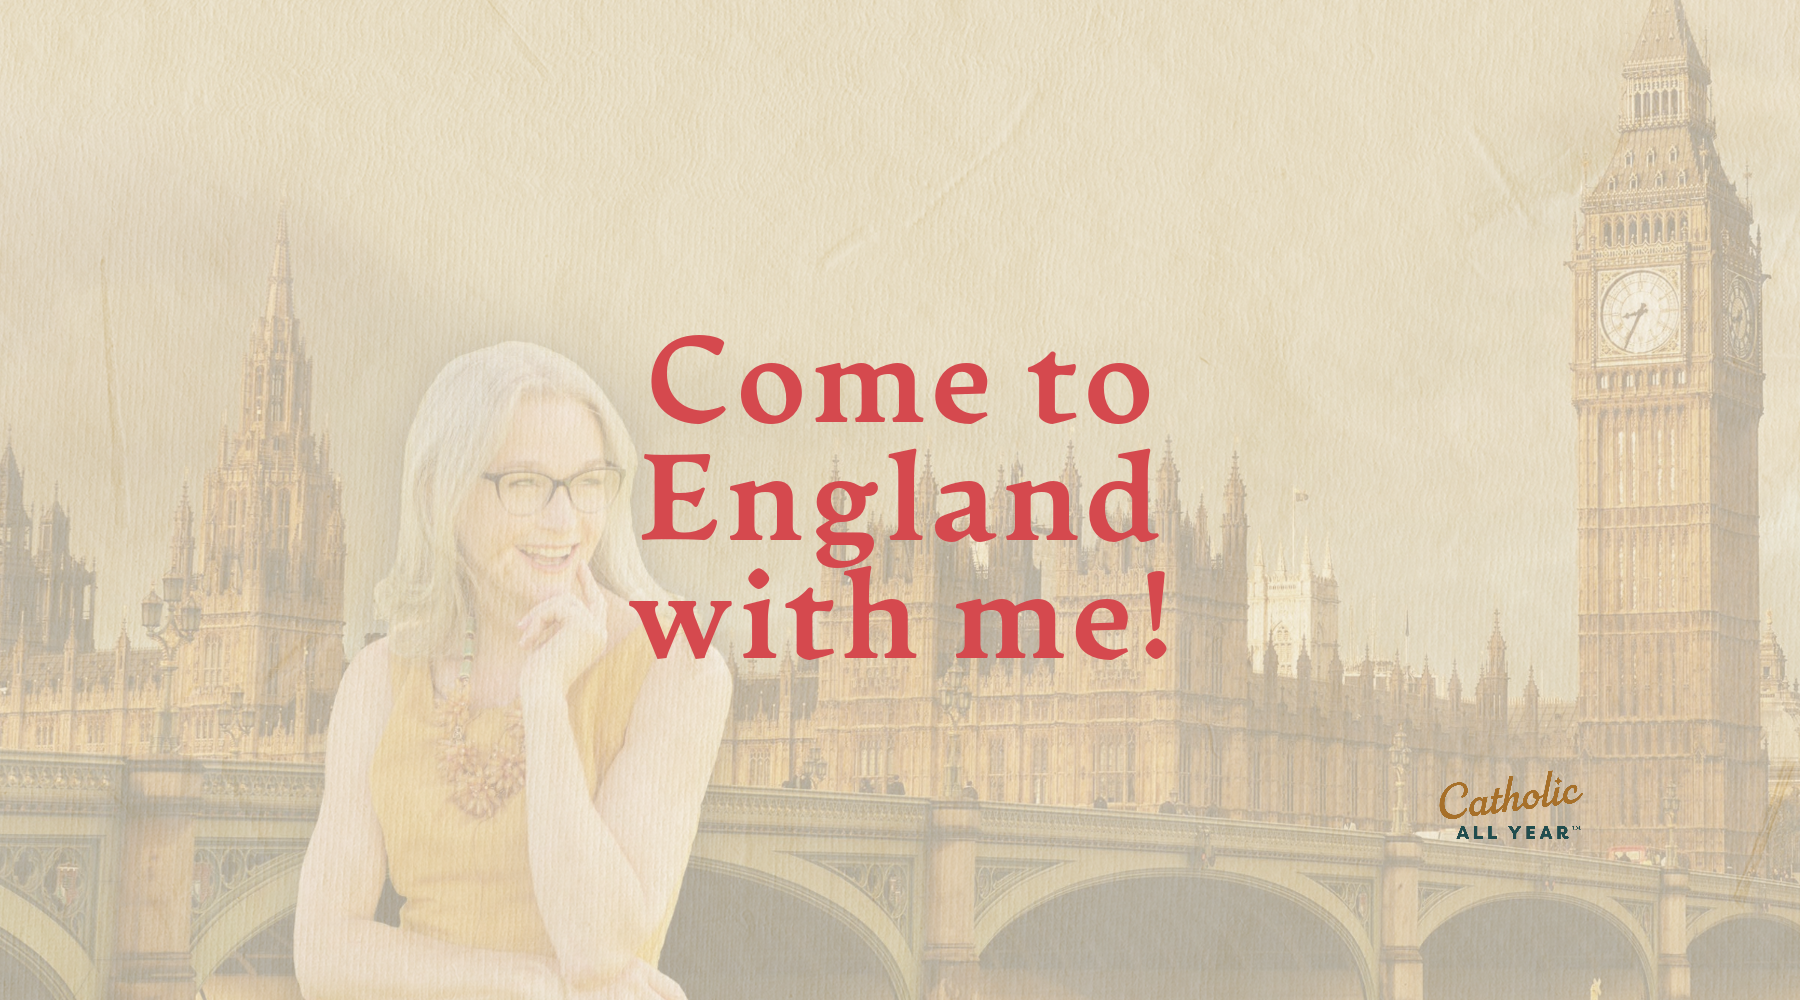 Come to England with me!